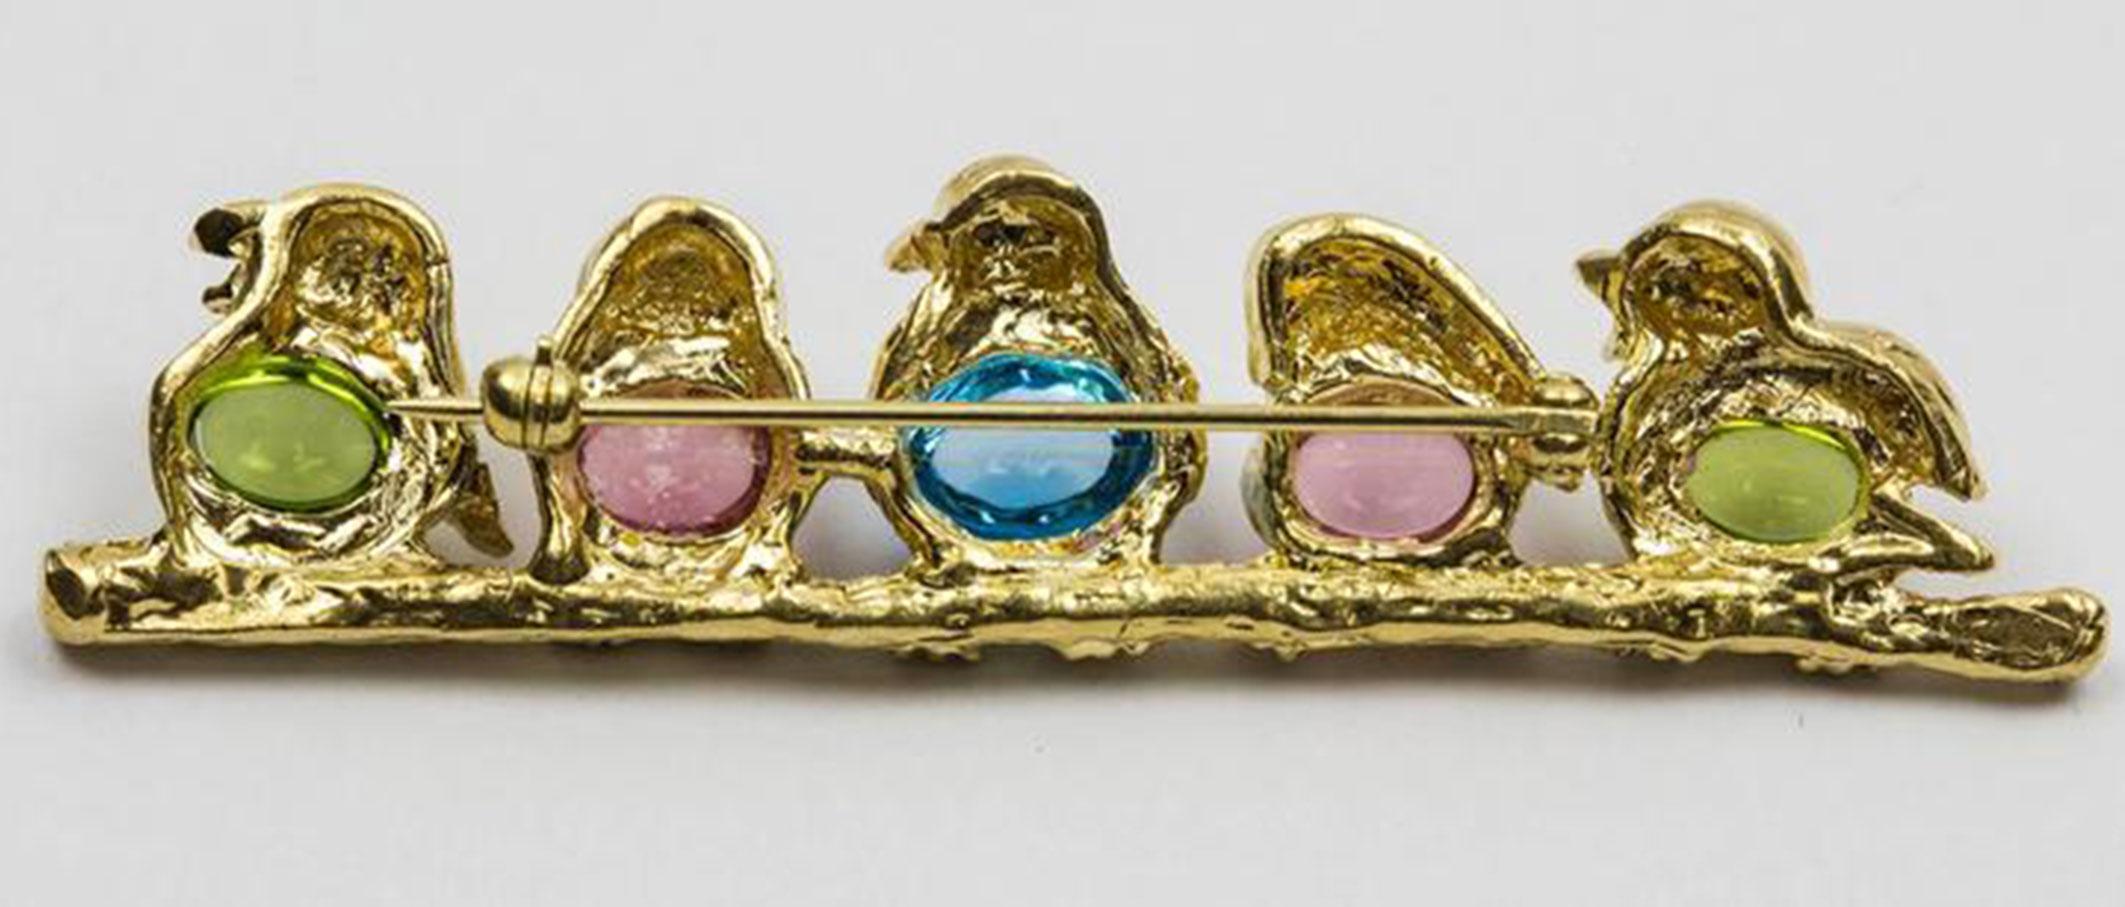 Adorable Birds on Branch bezel set with Peridot, Pink Tourmaline and Blue Topaz, Ruby set eyes; approx. 2.5” long. Finely hand crafted by Coach House in 18K Yellow Gold. Approx. weight of pin: 19.94gm. Chic, Fun and Timeless! 